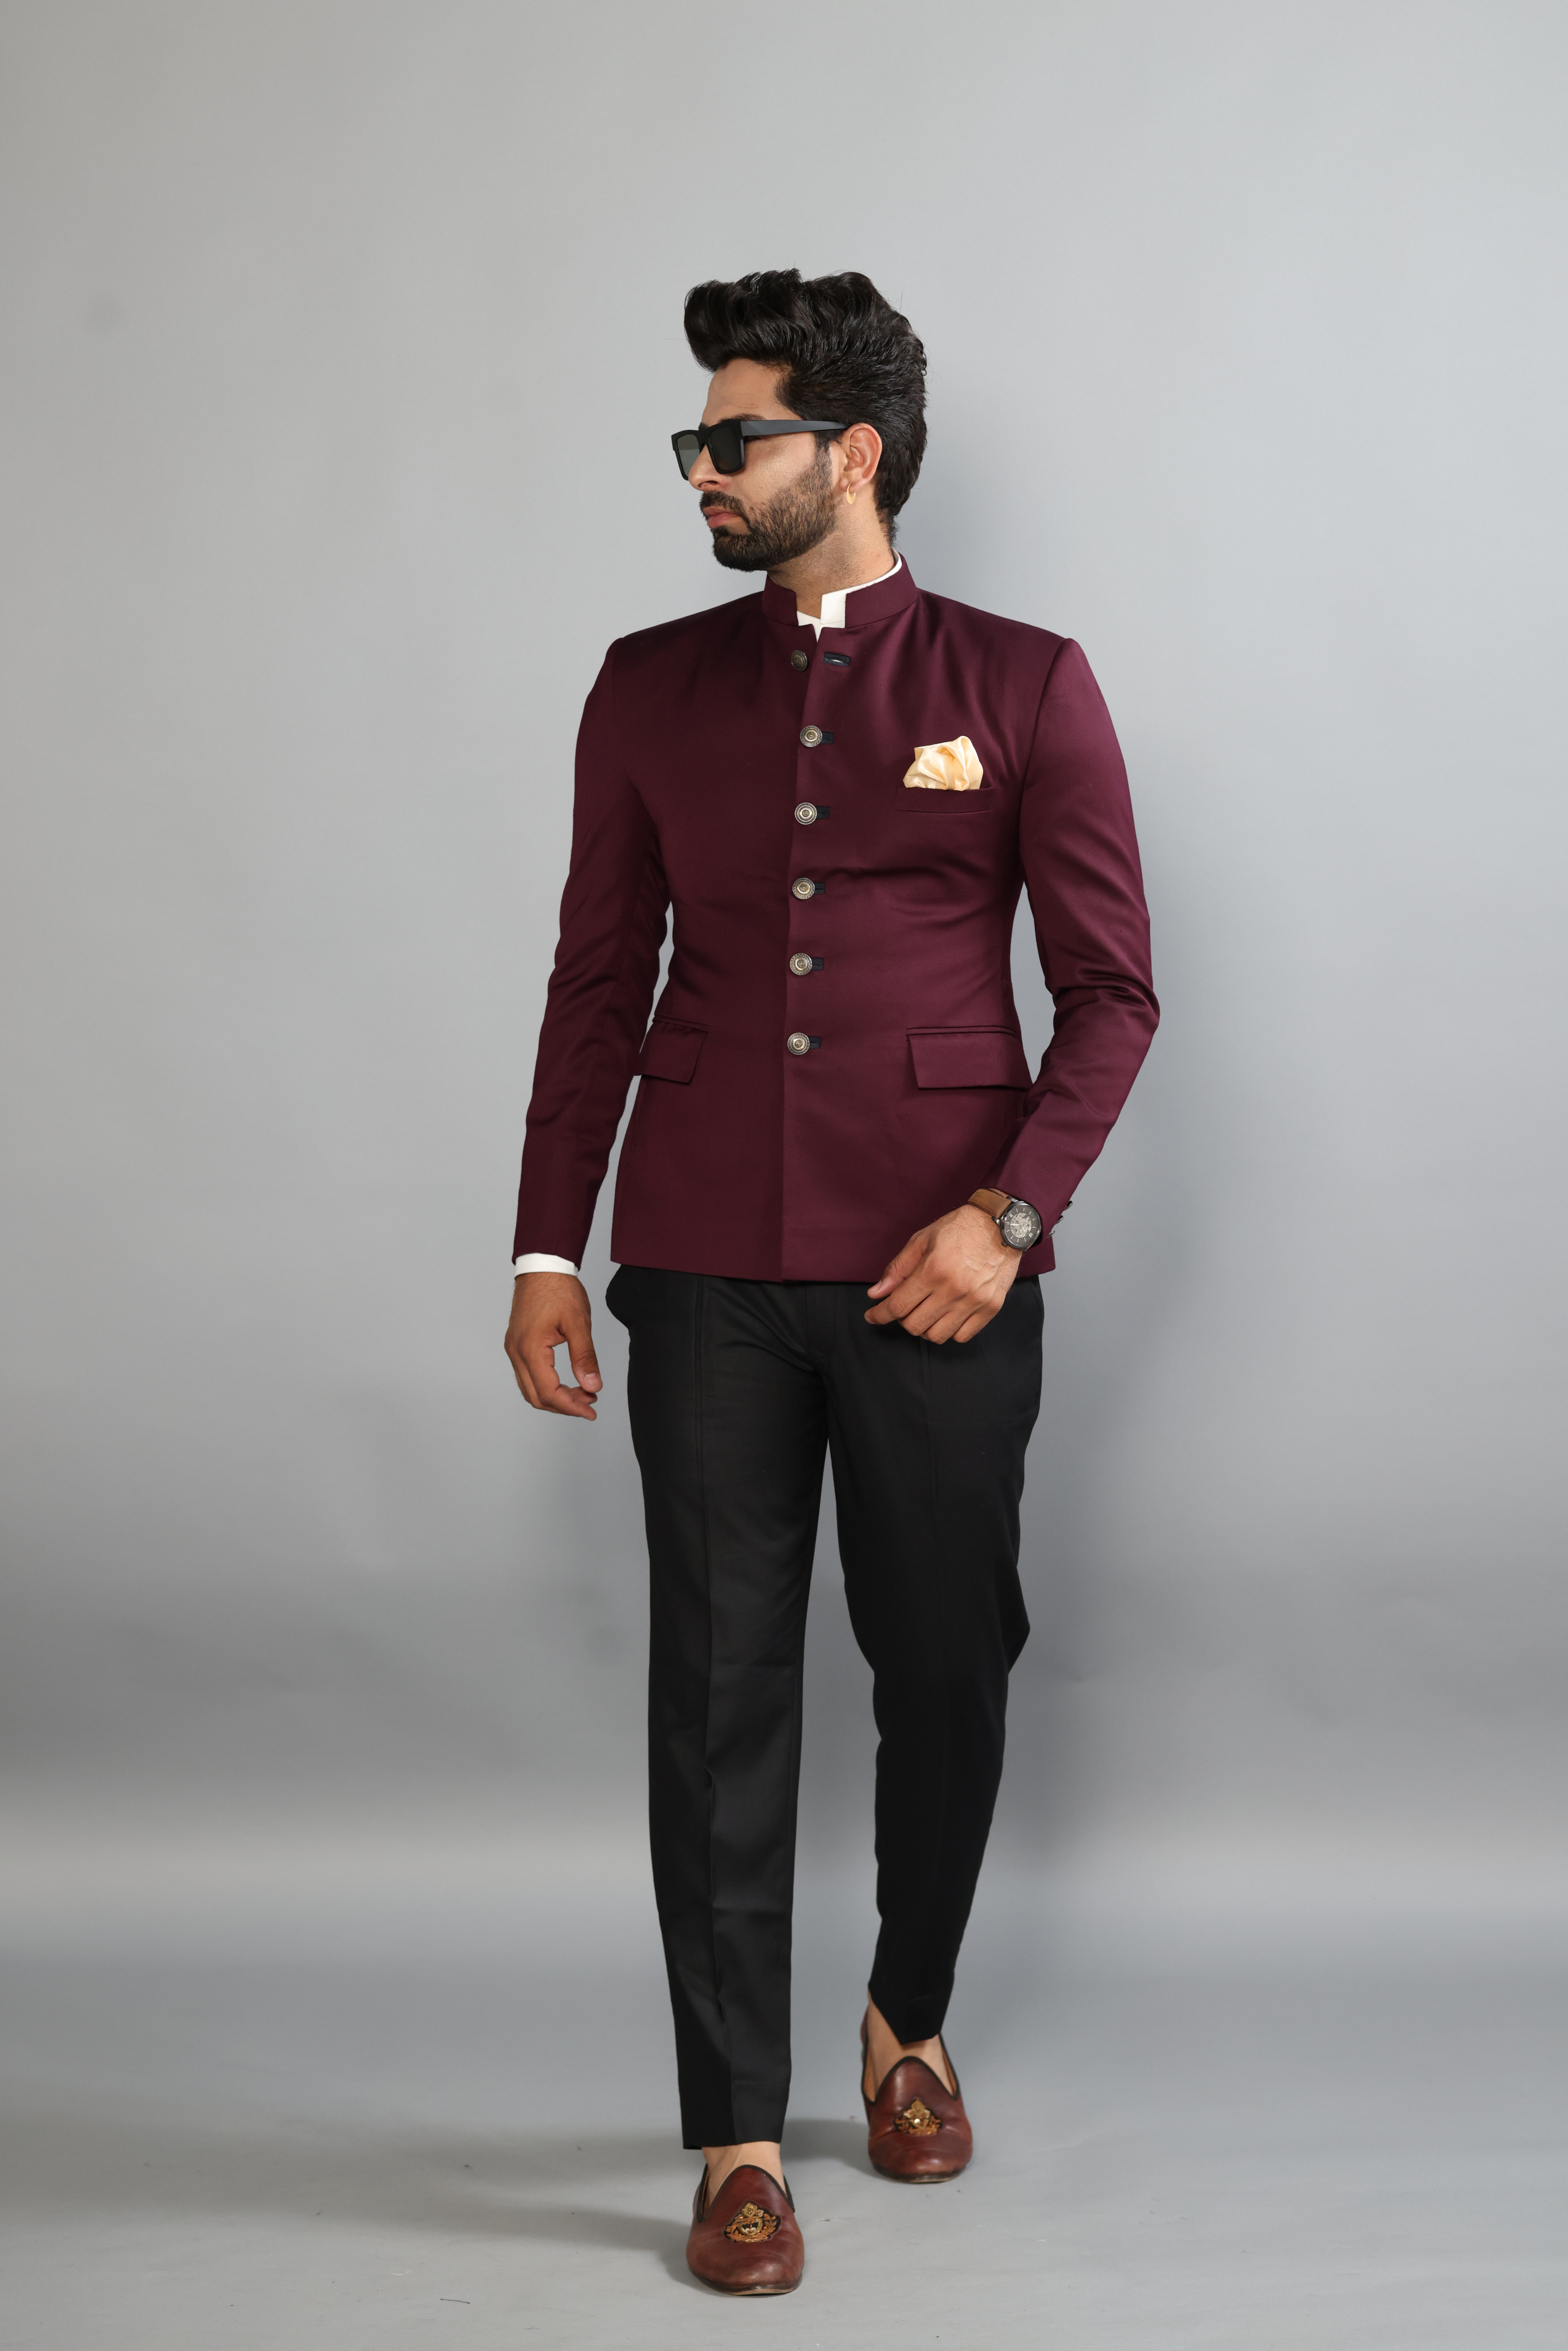 Elegant Wine Jodhpuri Band gala with Black Trouser |Terry Rayon| Perfect for Wedding and Party Wear|